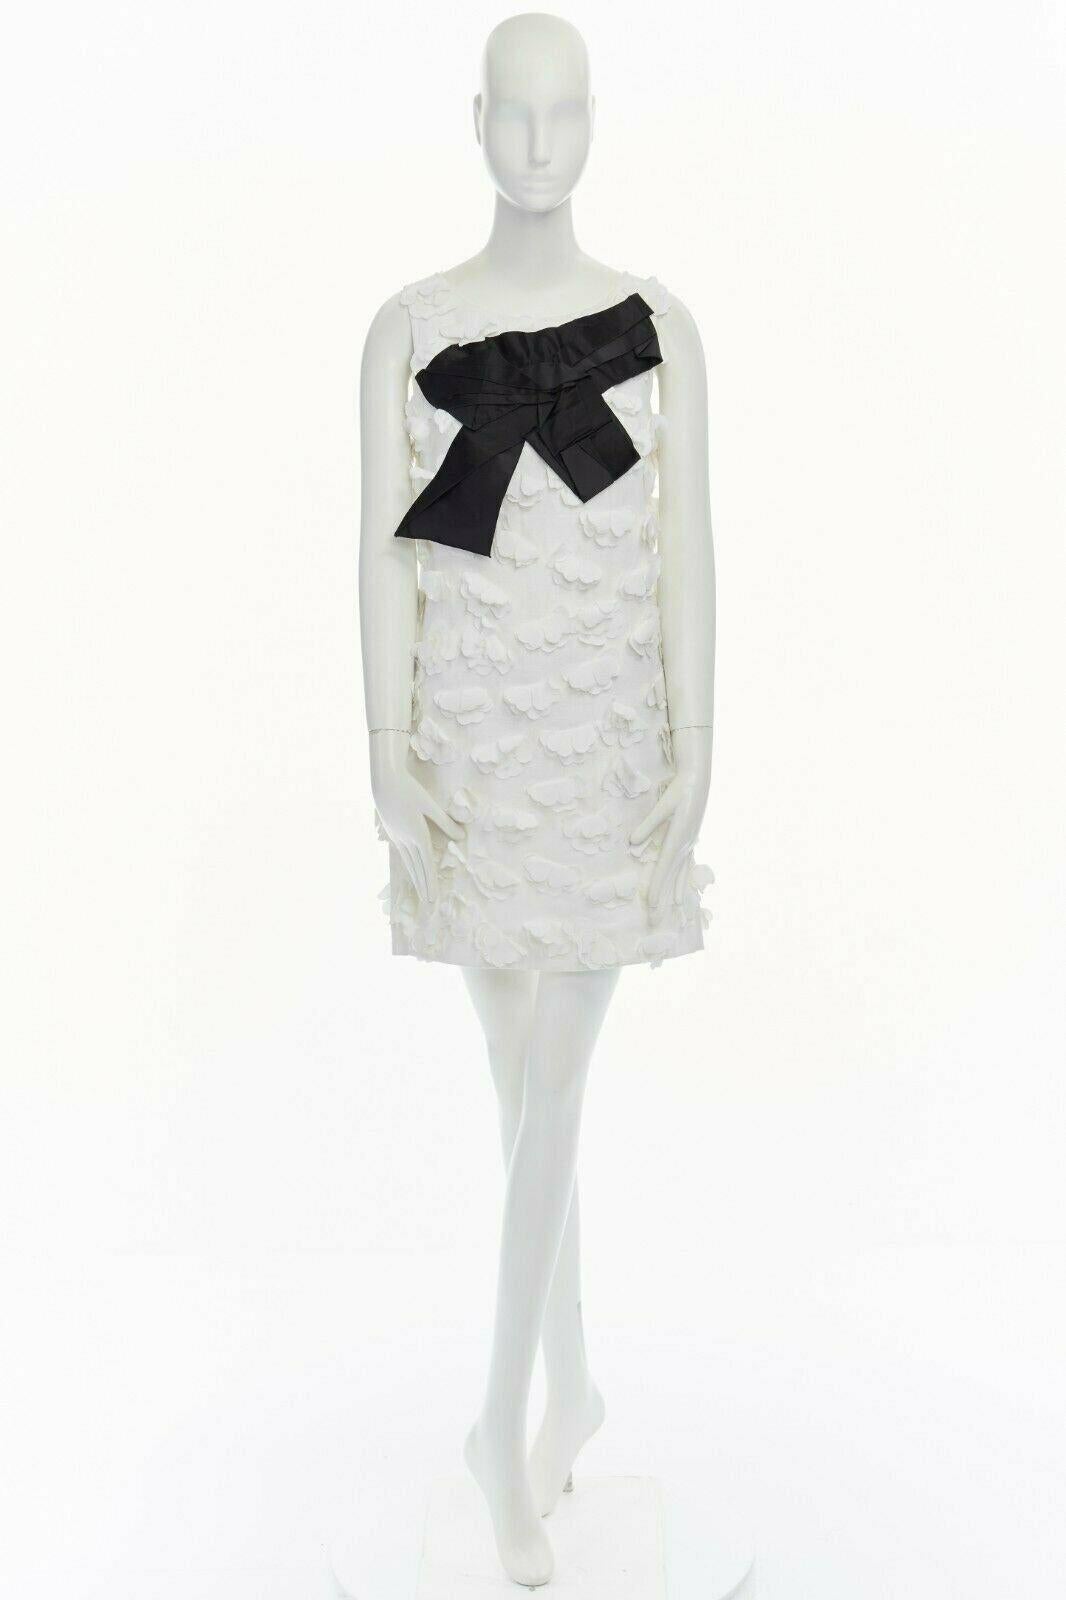 DOLCE GABBANA white 3D floral petal applique black bow sheath dress IT38 US0 XS 
Reference: TGAS/A00534 
Brand: Dolce Gabbana 
Designer: Domenico Dolce and Stefano Gabbana 
Material: Linen 
Color: White 
Pattern: Floral 
Closure: Zip 
Extra Detail: